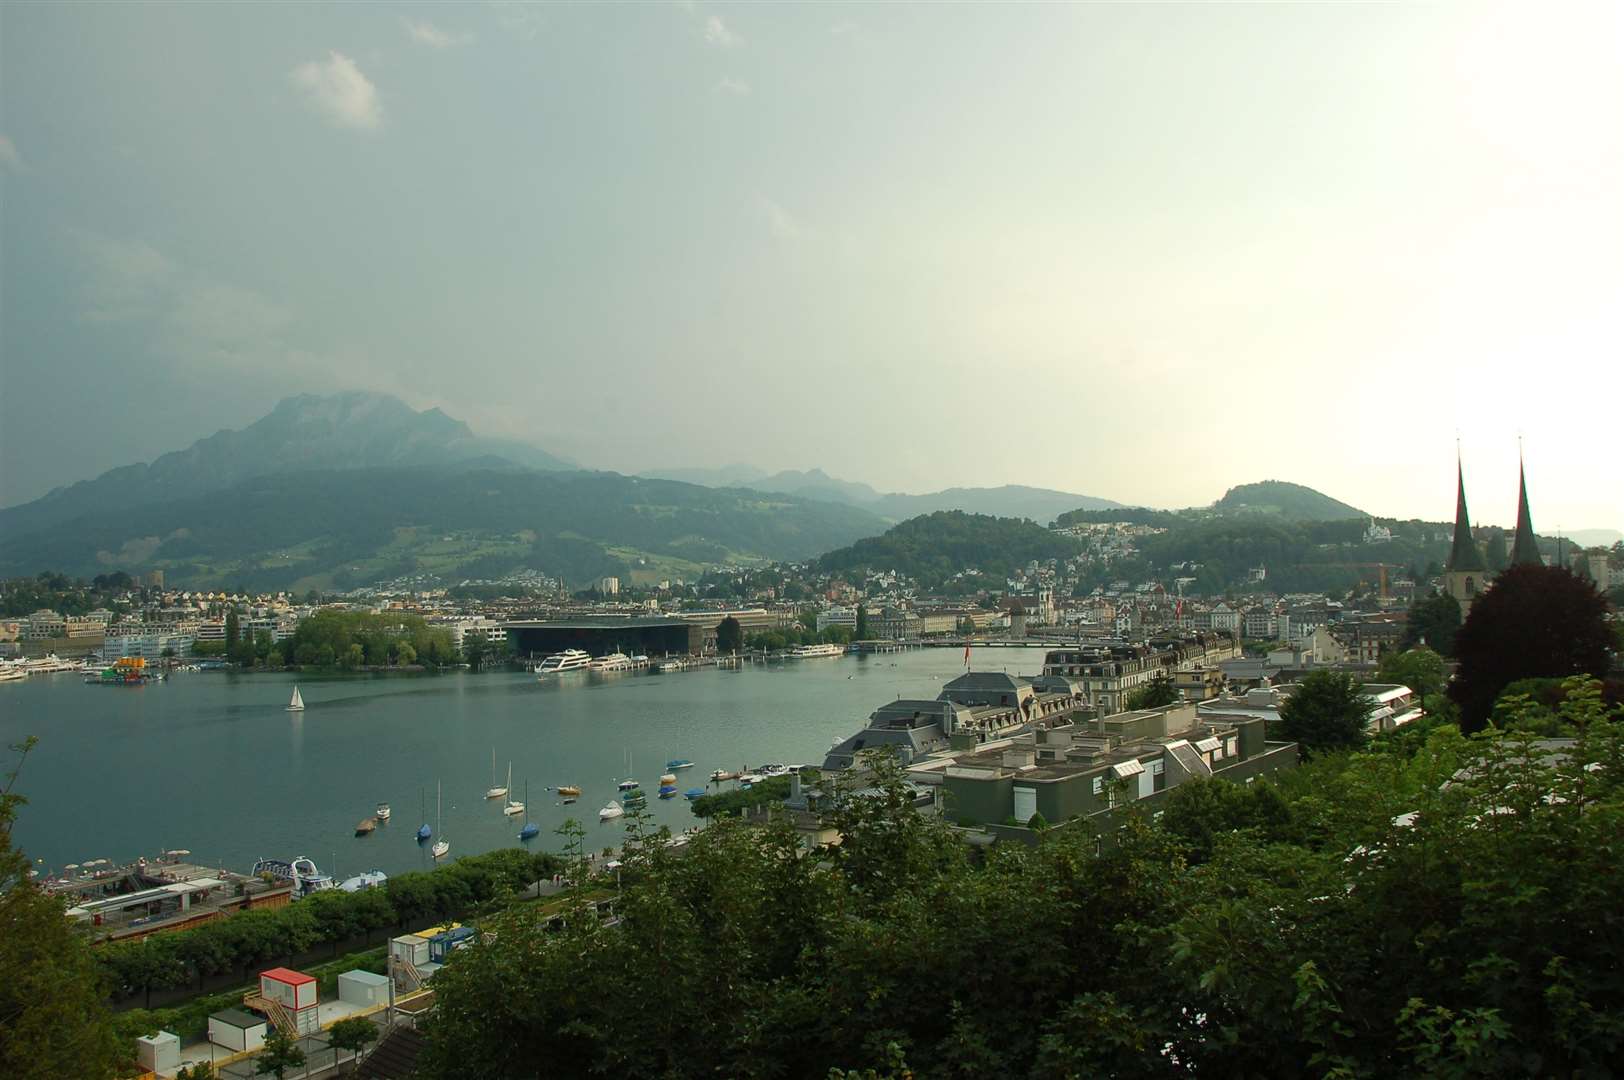 Luzern at sunset, curving round the end of the lake, with the bulk of the Pilatus mountain as a background.